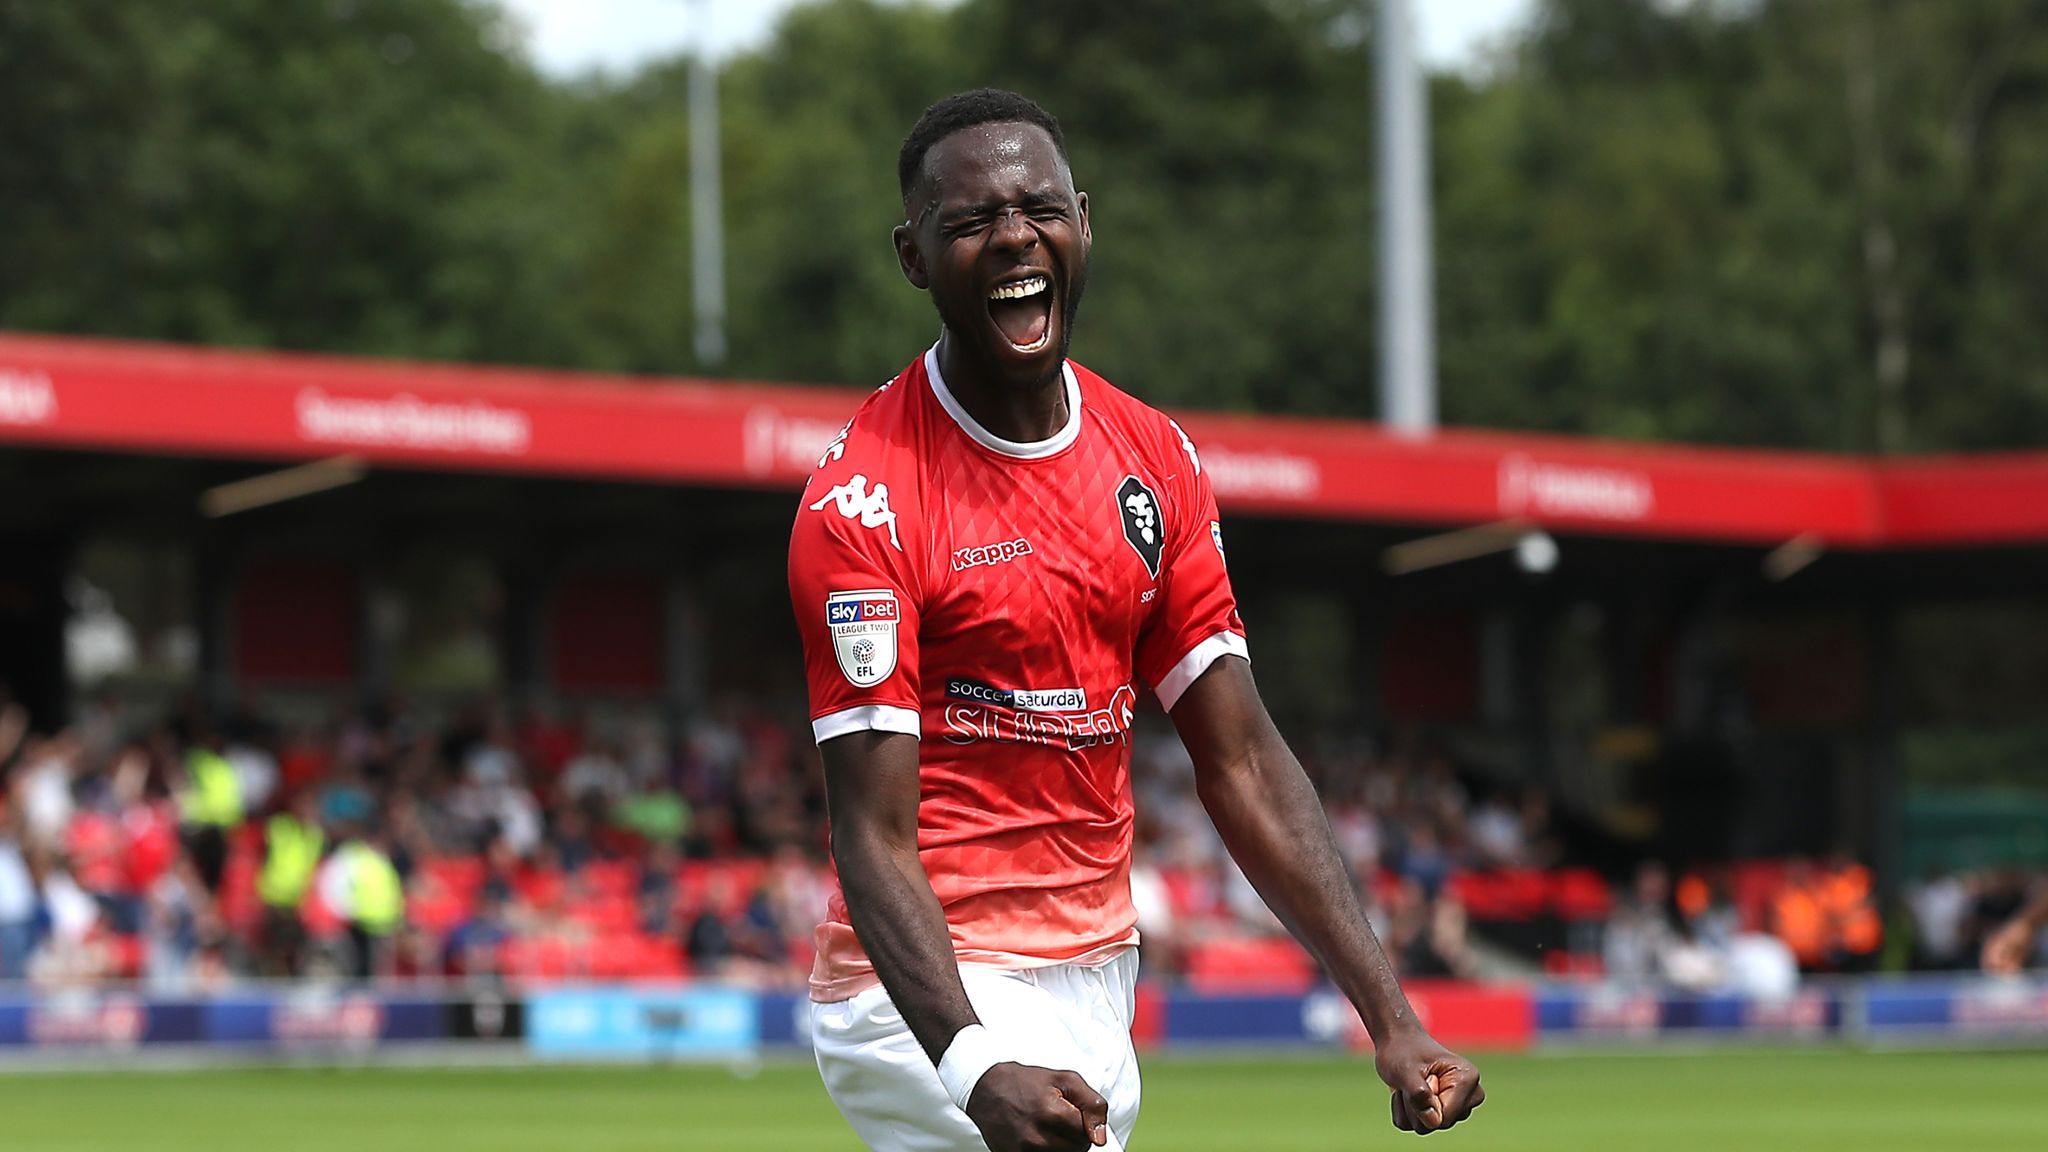 Salford 2-0 Stevenage: Dieseruvwe hits double as win first ever Football League game | Football News | Sky Sports